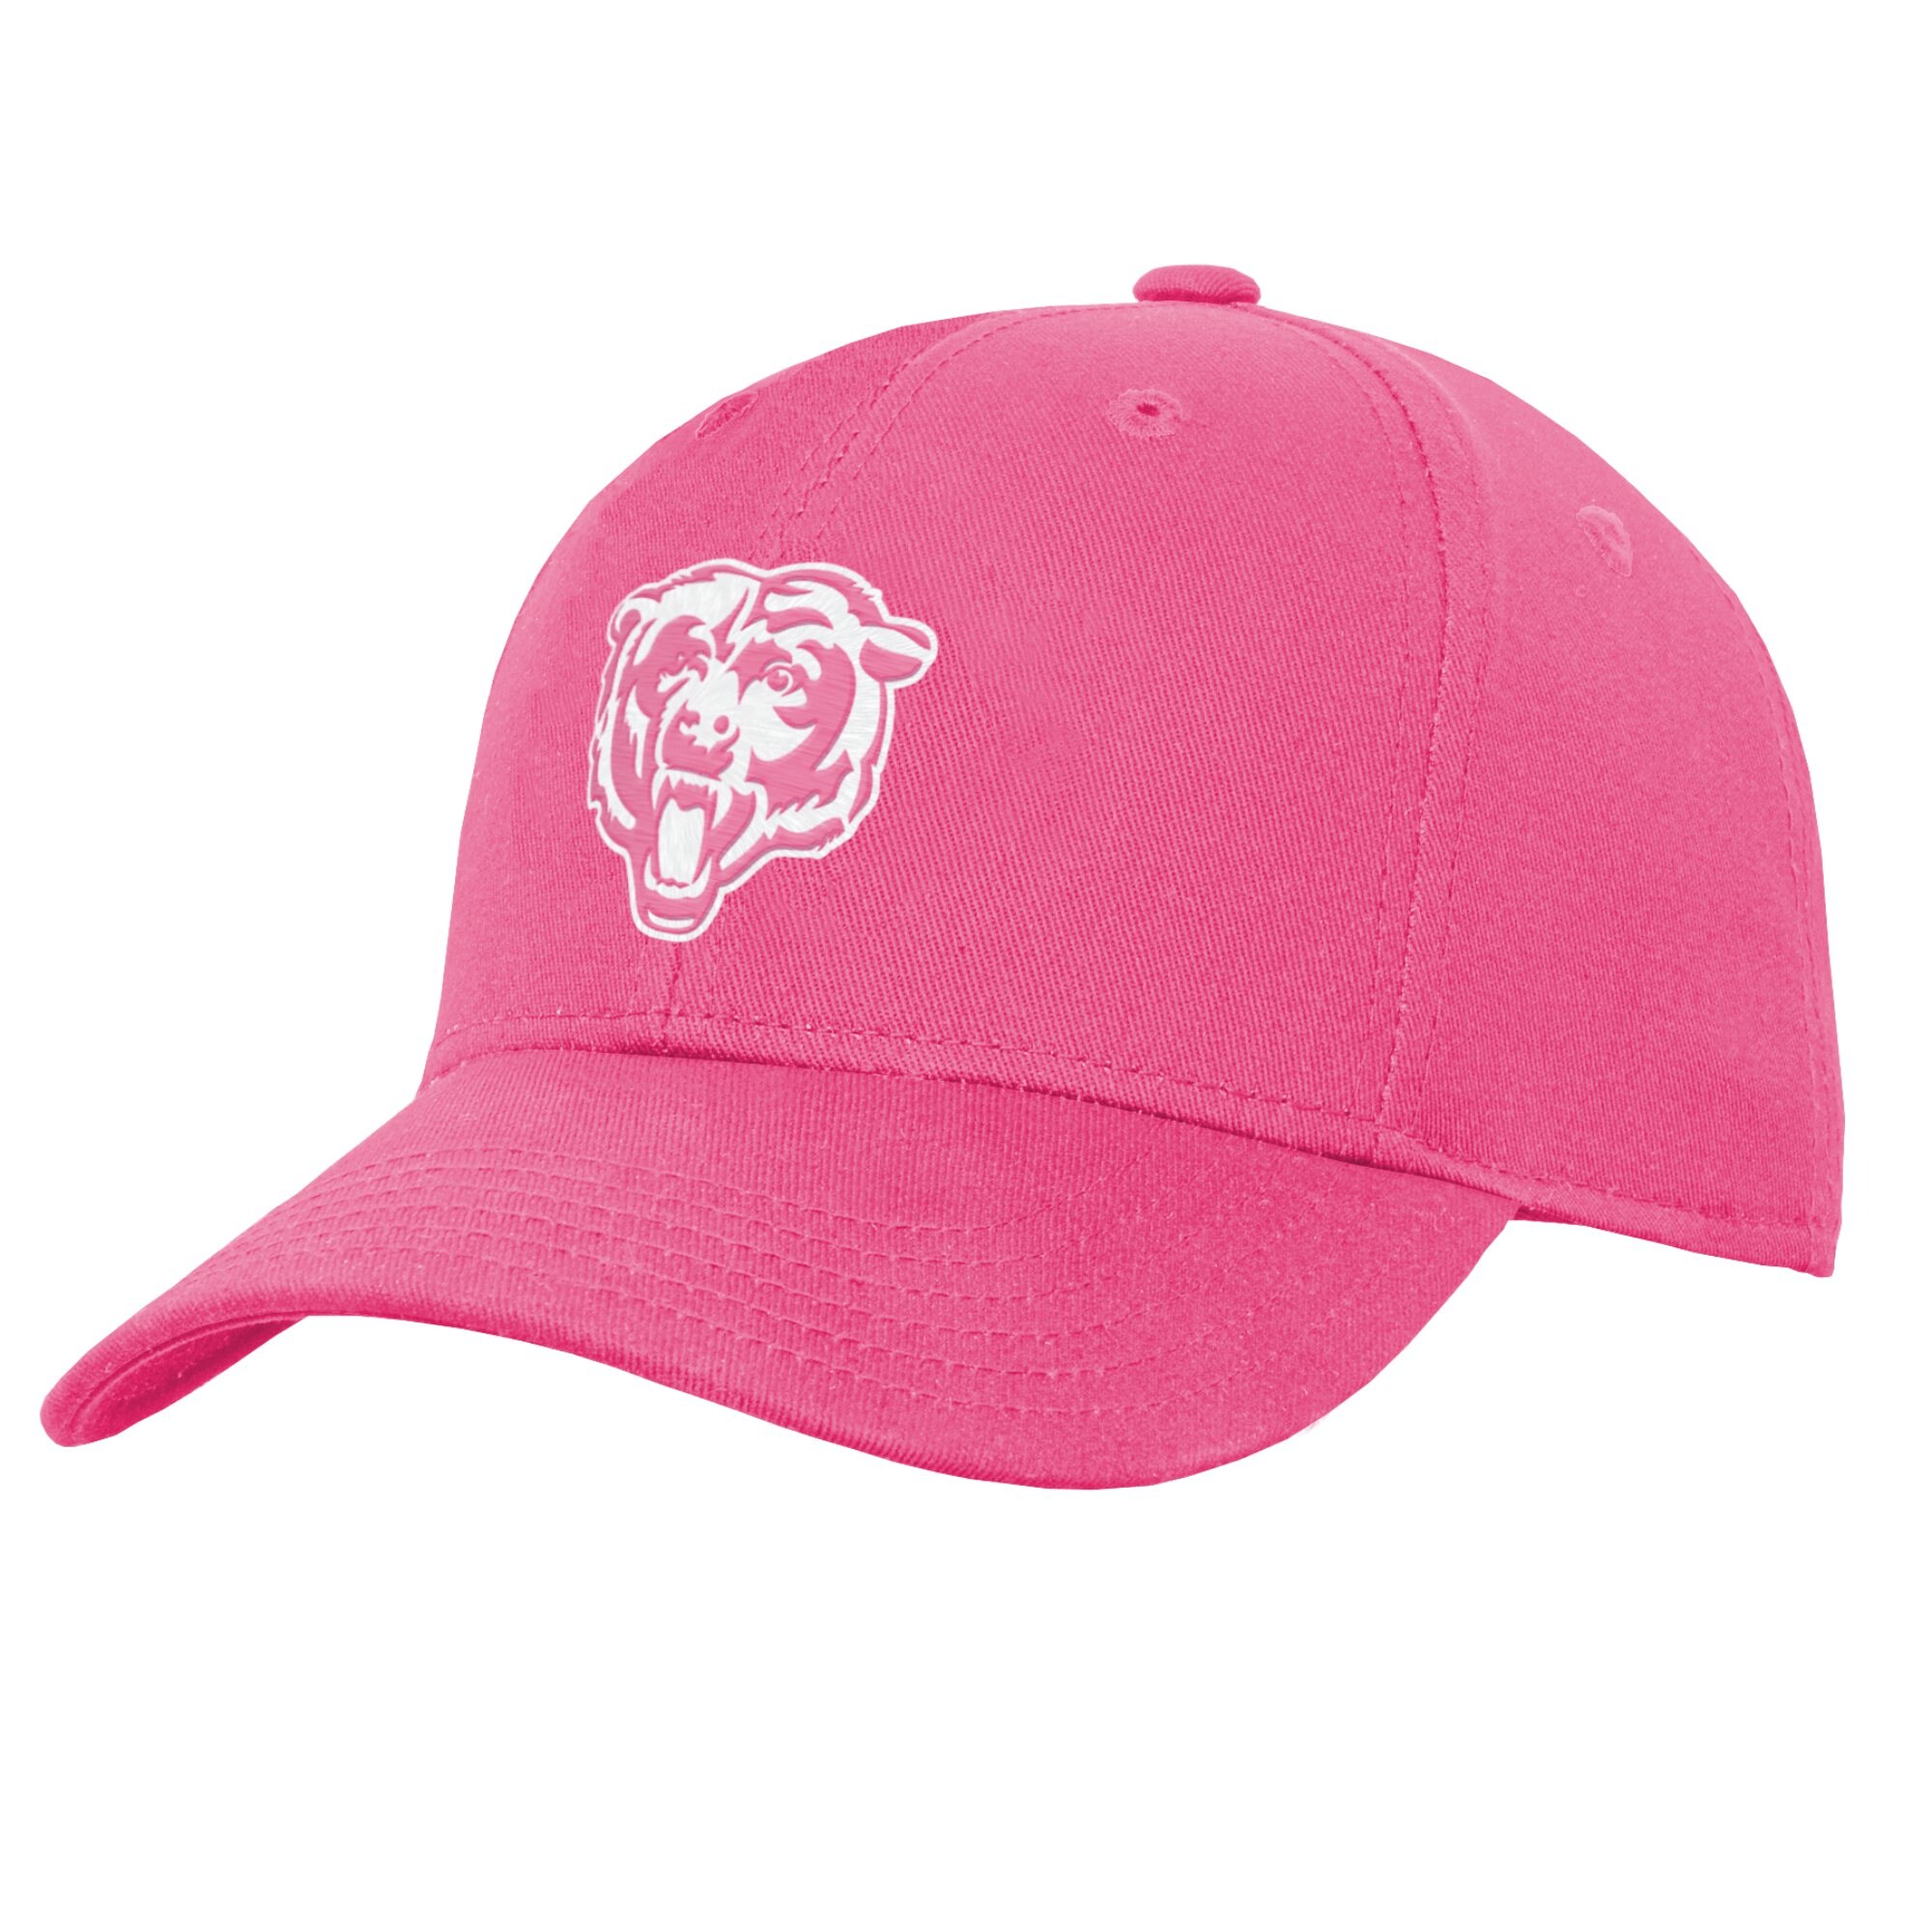 Let your kiddo showcase an evergrowing appreciation for their NFL favorites by grabbing this Chicago Bears adjustable hat. It features the undeniable Chicago Bears logo embroidered front and center on the crown and its bright pink color calls attention to your young one's growing fandom for all the right reasons. Whether your kiddo is spending the day outdoors or watching their team score big, the fabric strap closure helps them secure the perfect fit for it all.Six panels with eyeletsCurved billOfficially licensedStructured fitAdjustable hook and loop fastener strapOne size fits mostMid CrownImportedWipe clean with a damp clothBrand: OuterstuffEmbroidered graphicsMaterial: 100% Cotton